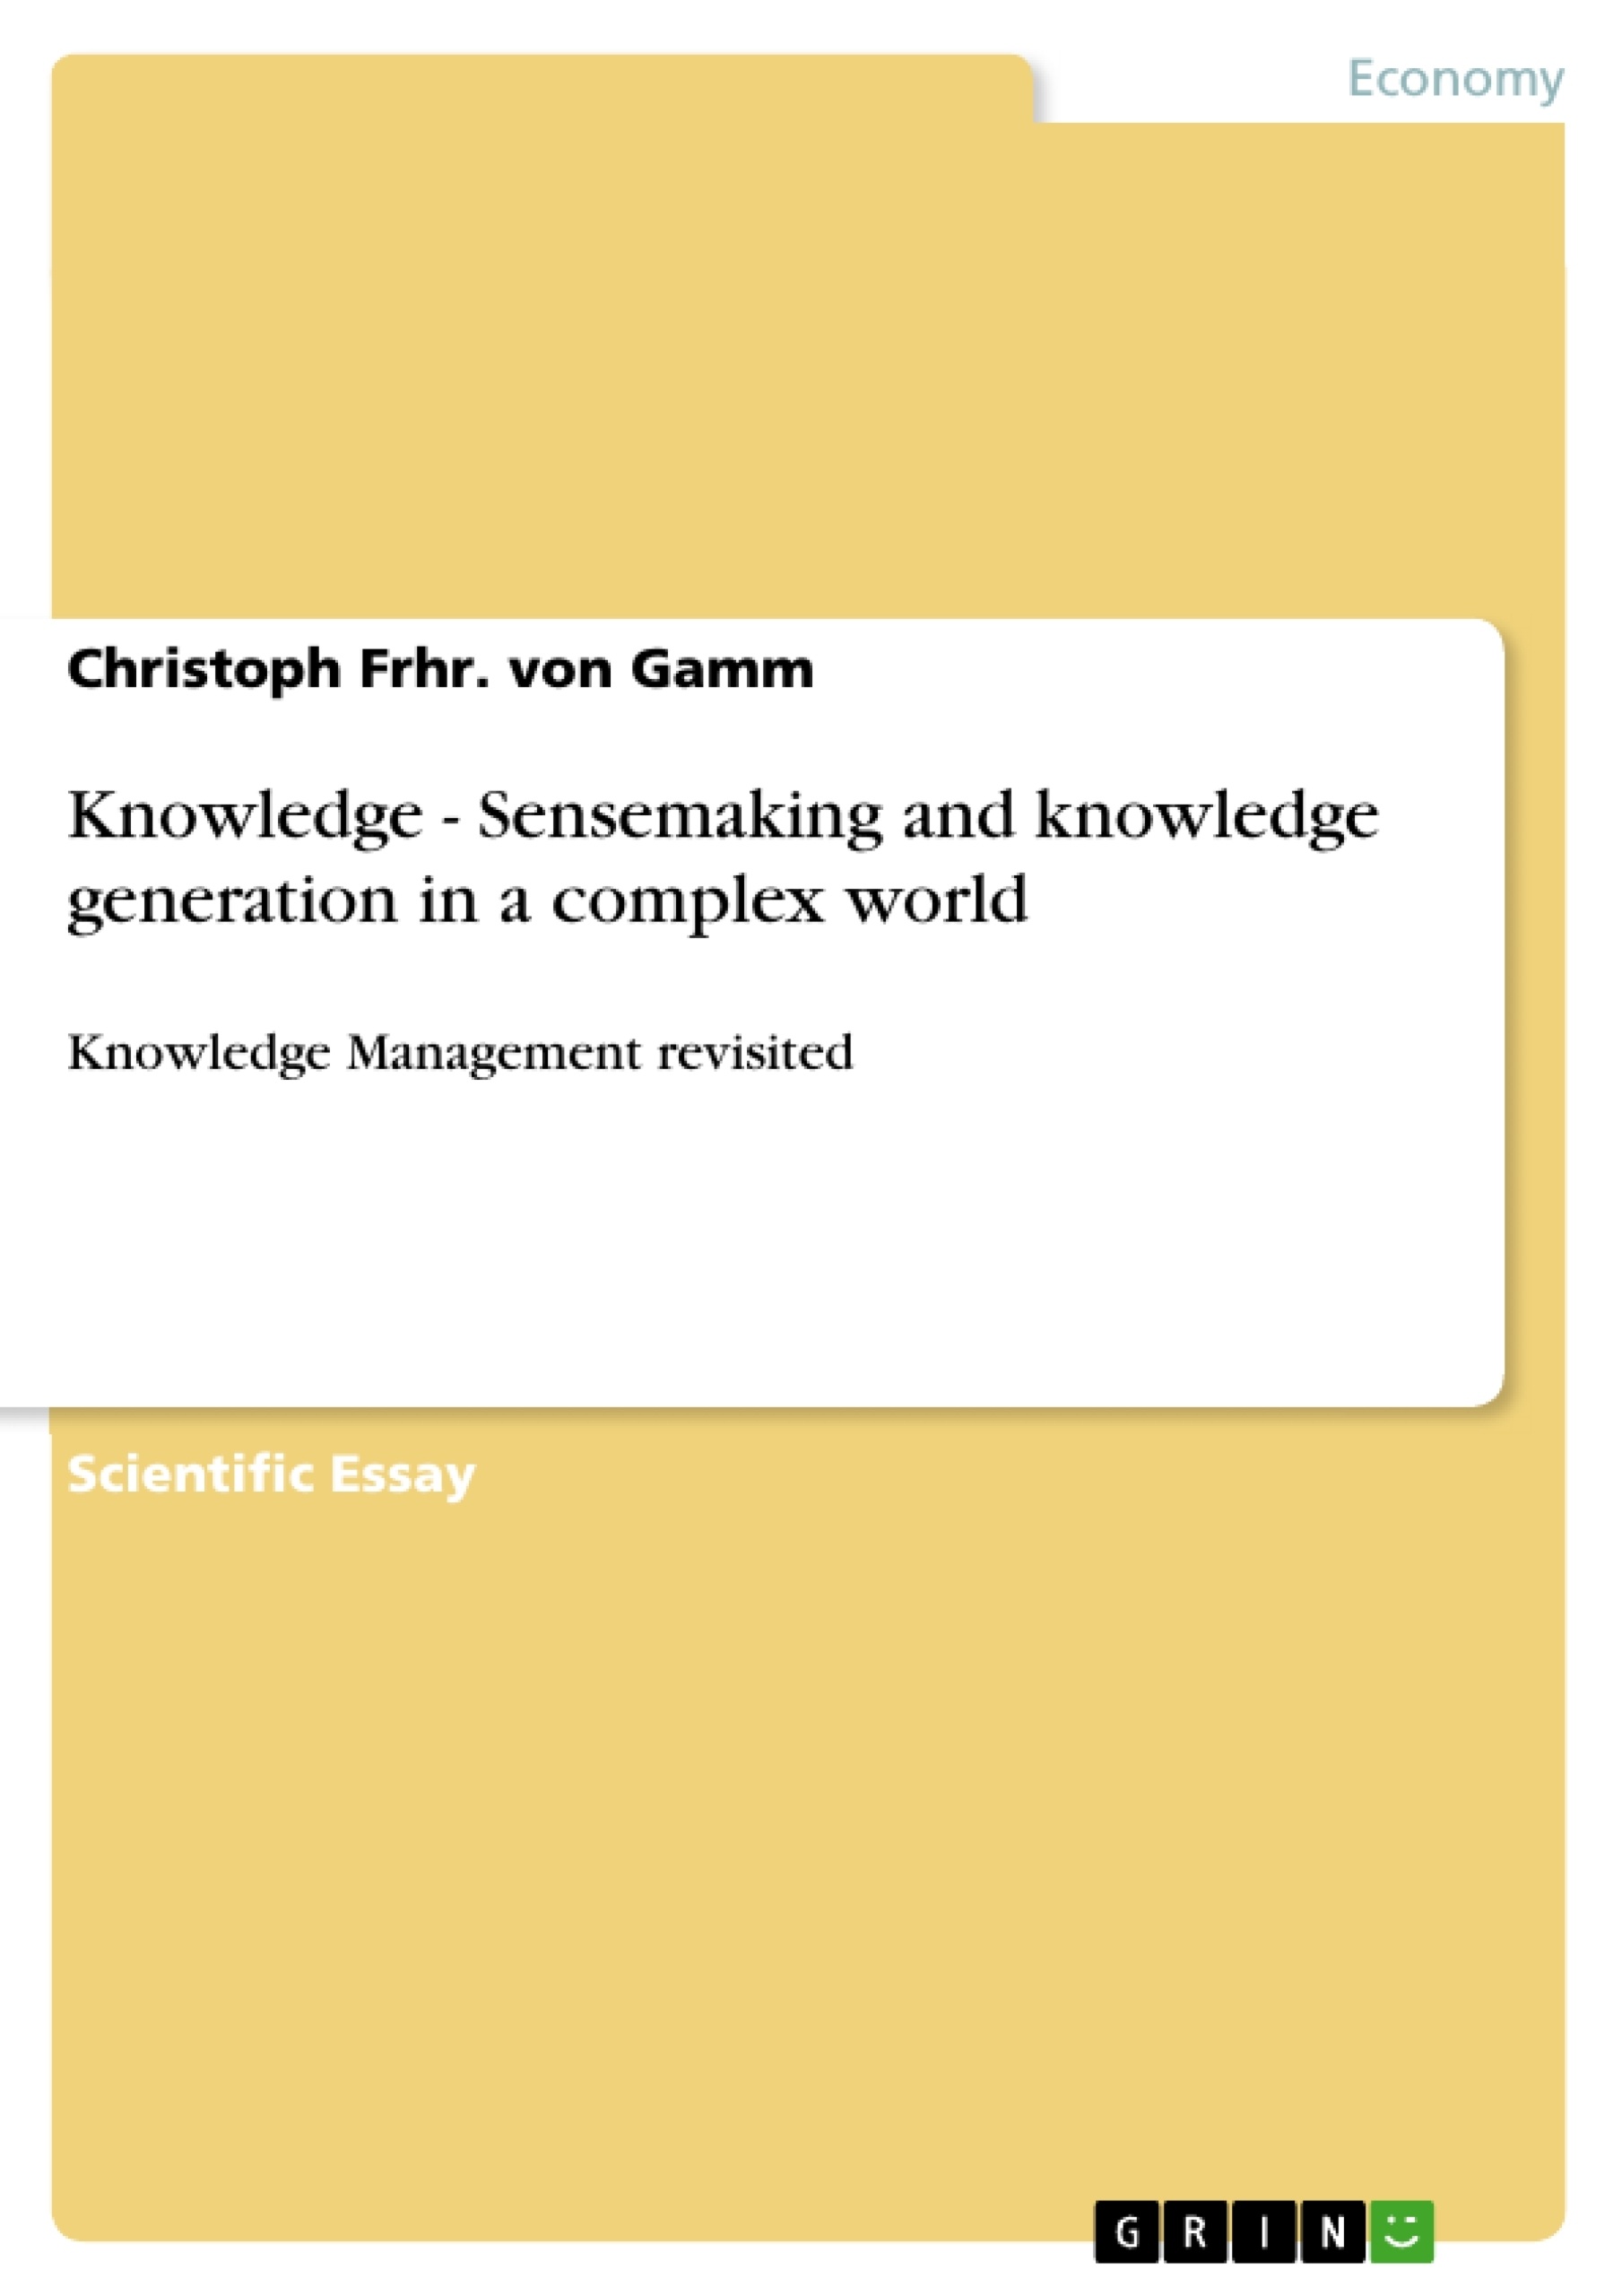 Title: Knowledge - Sensemaking and knowledge generation in a complex world